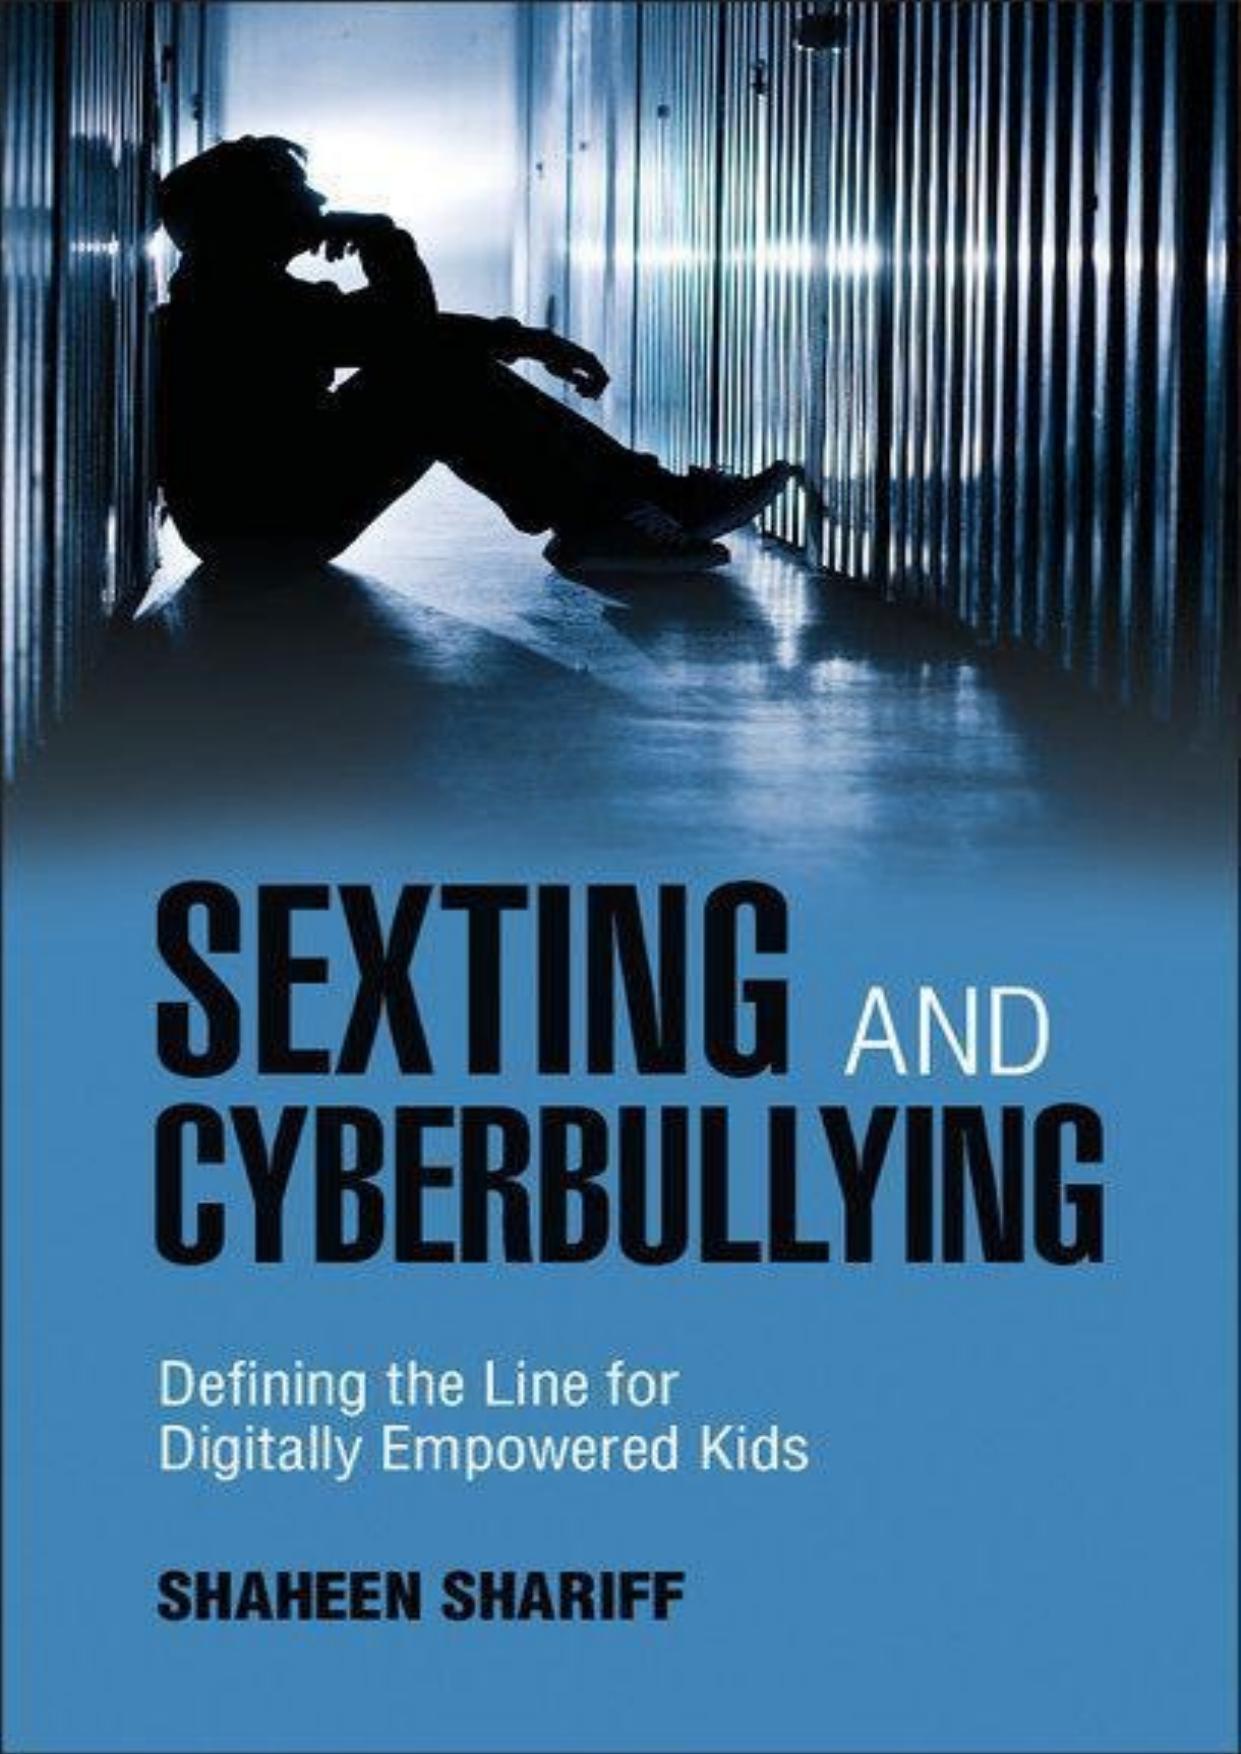 Sexting and Cyberbullying: Defining the Line for Digitally Empowered Kids by Shaheen Shariff